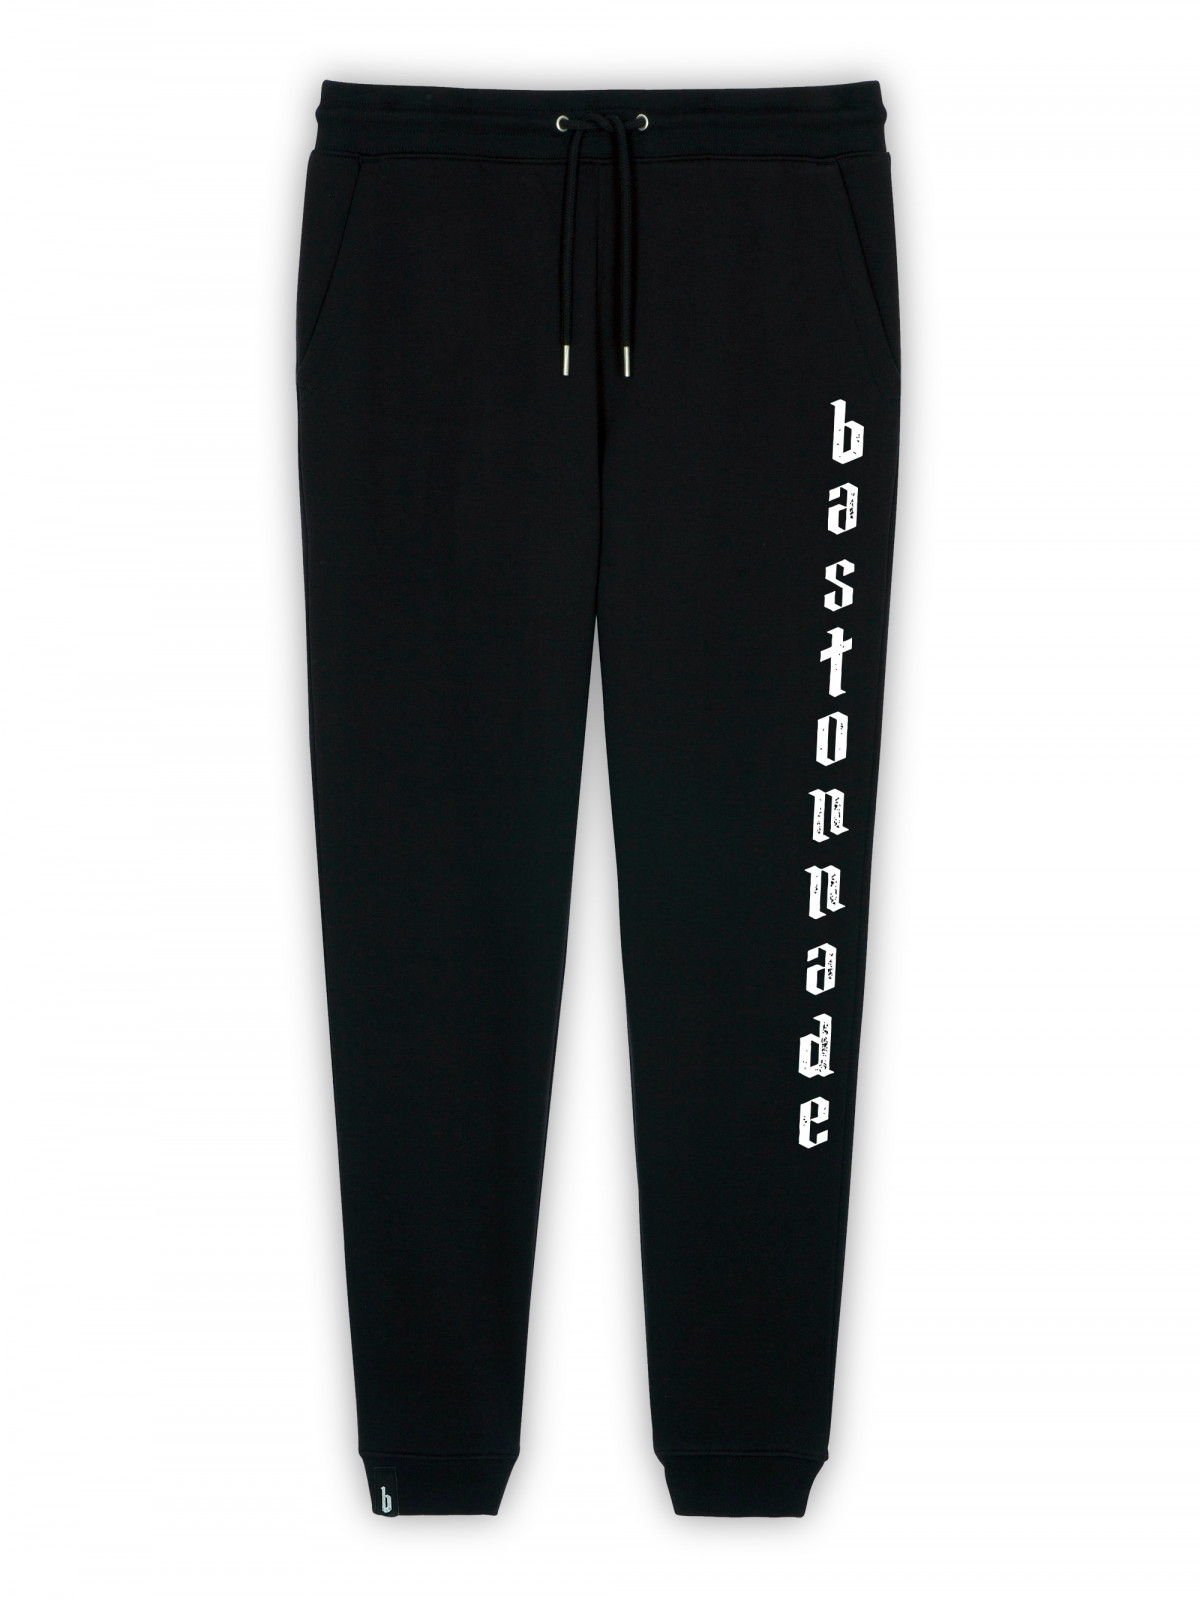 Front of the 'Gothic' jogging pants for men and women by swiss streetwear brand bastonnade clothing.